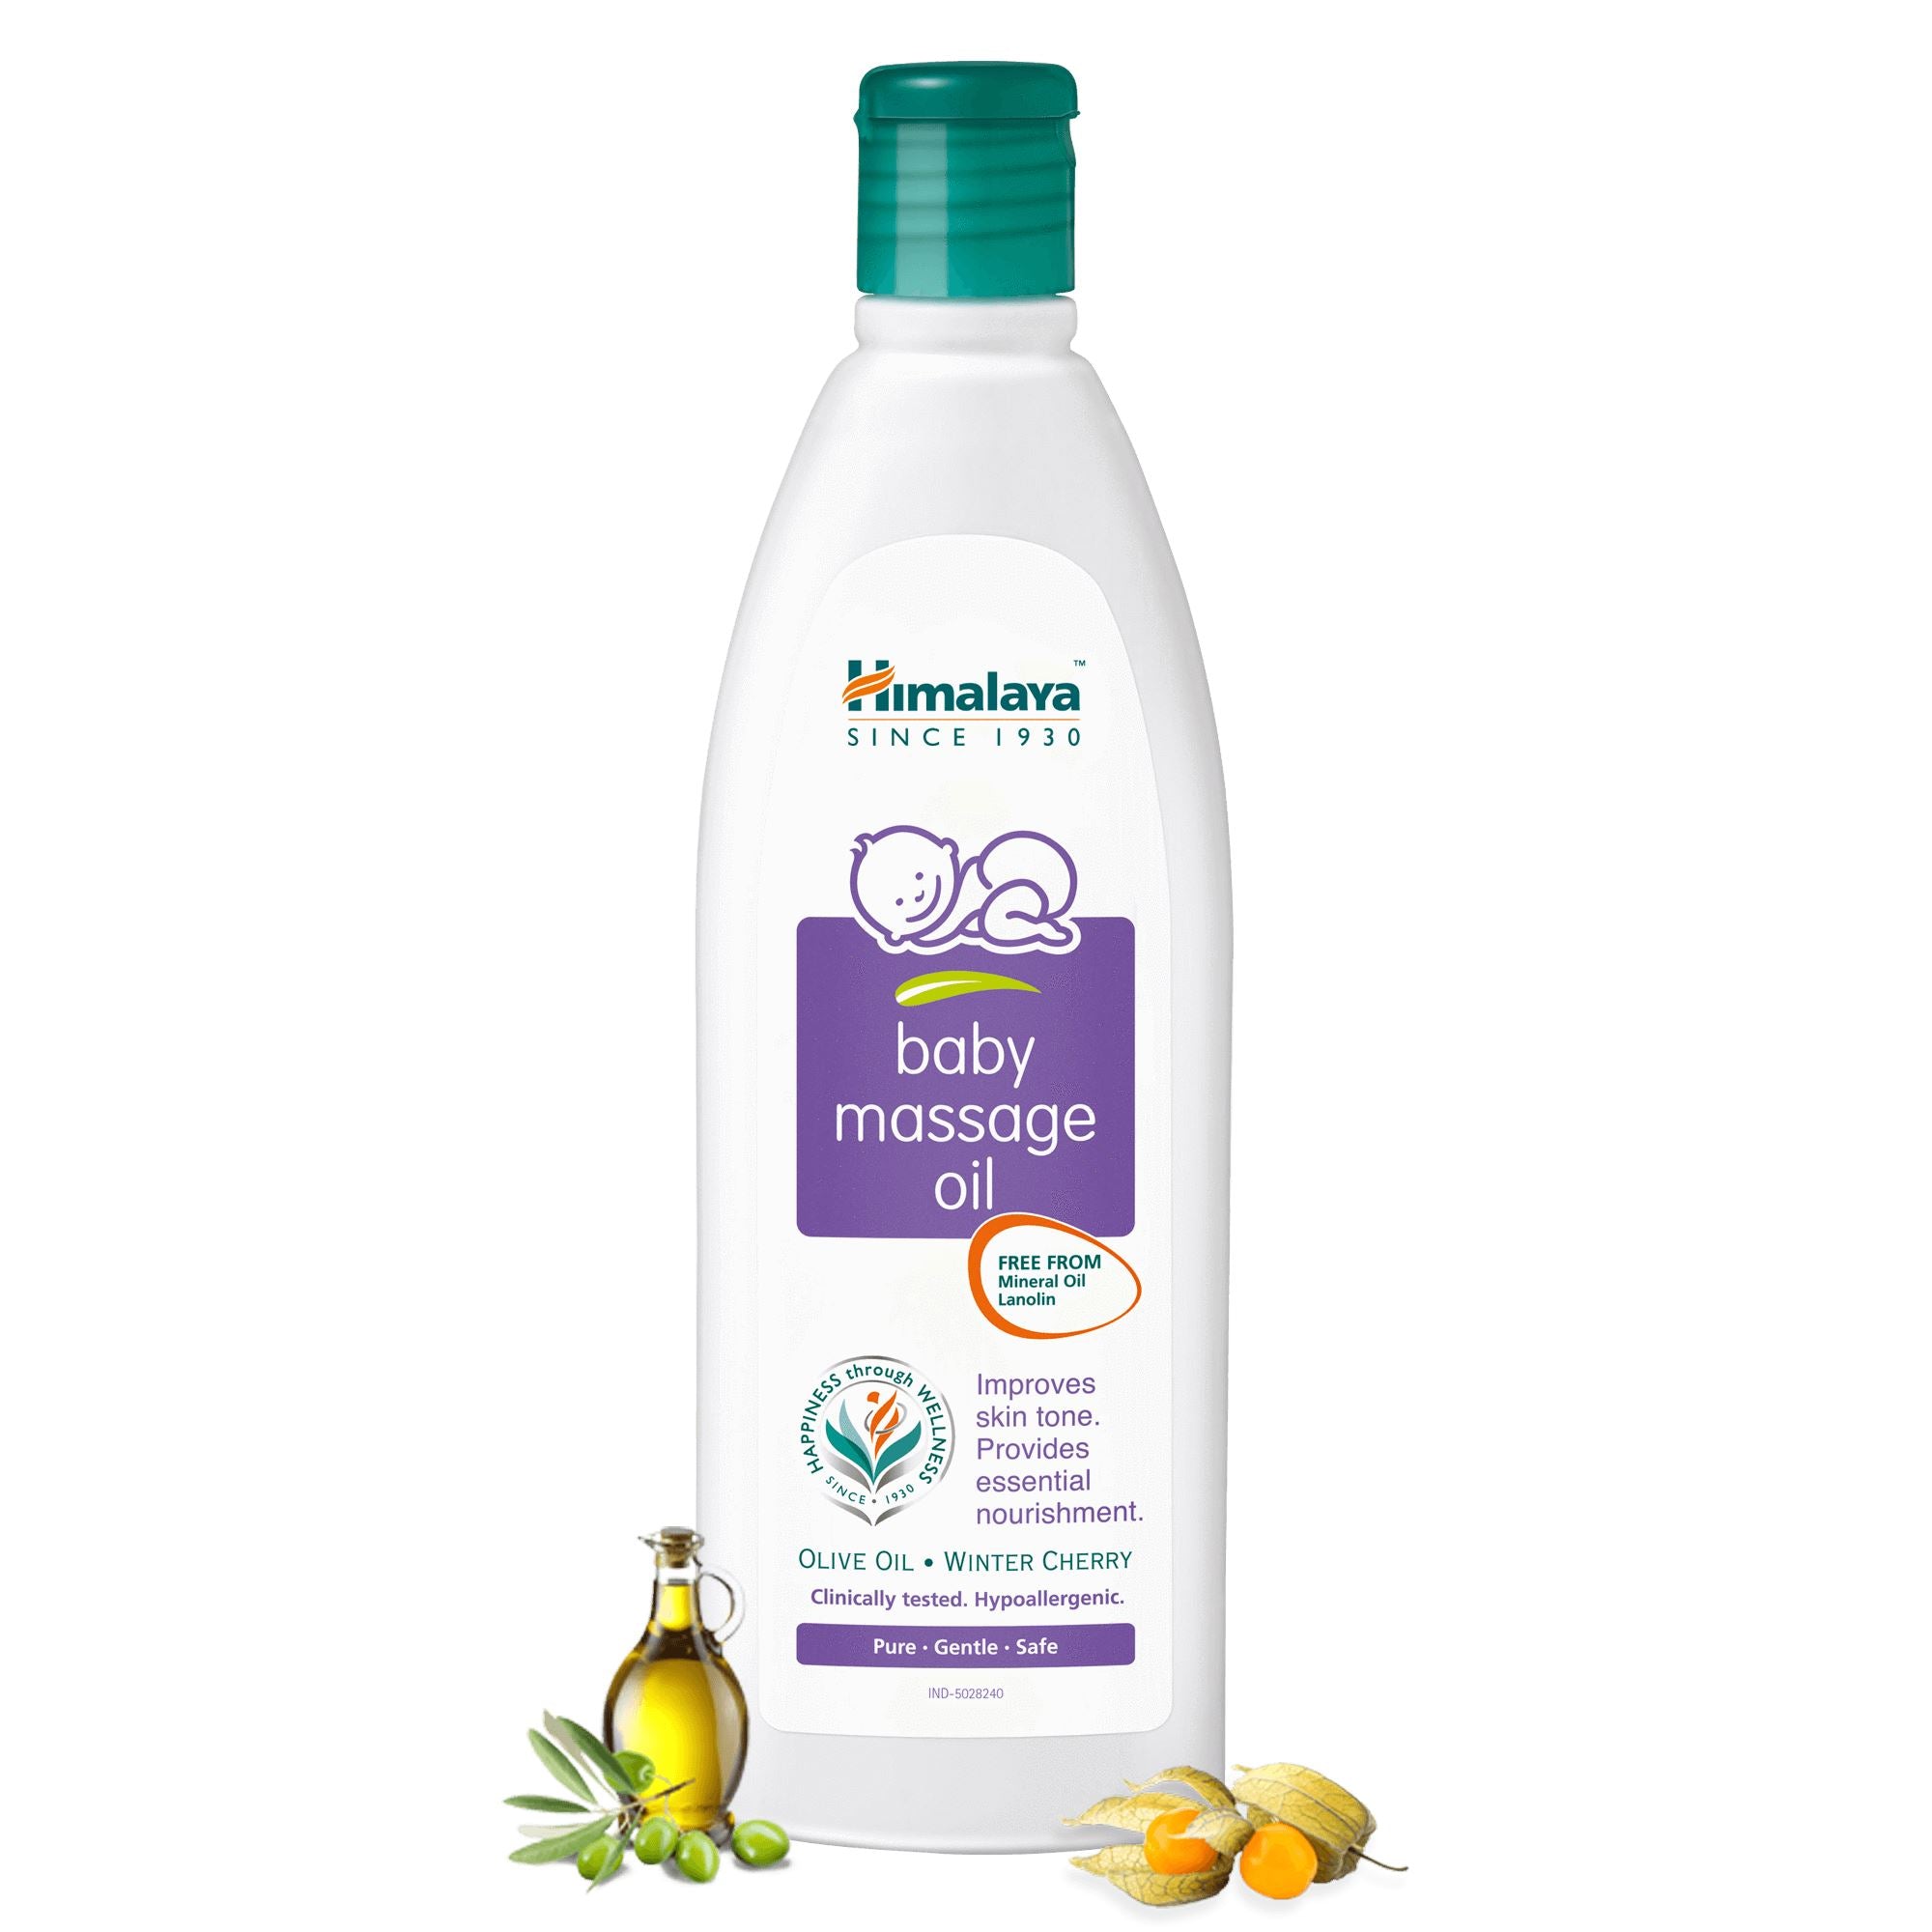 Himalaya baby massage oil - To improve baby's growth and development